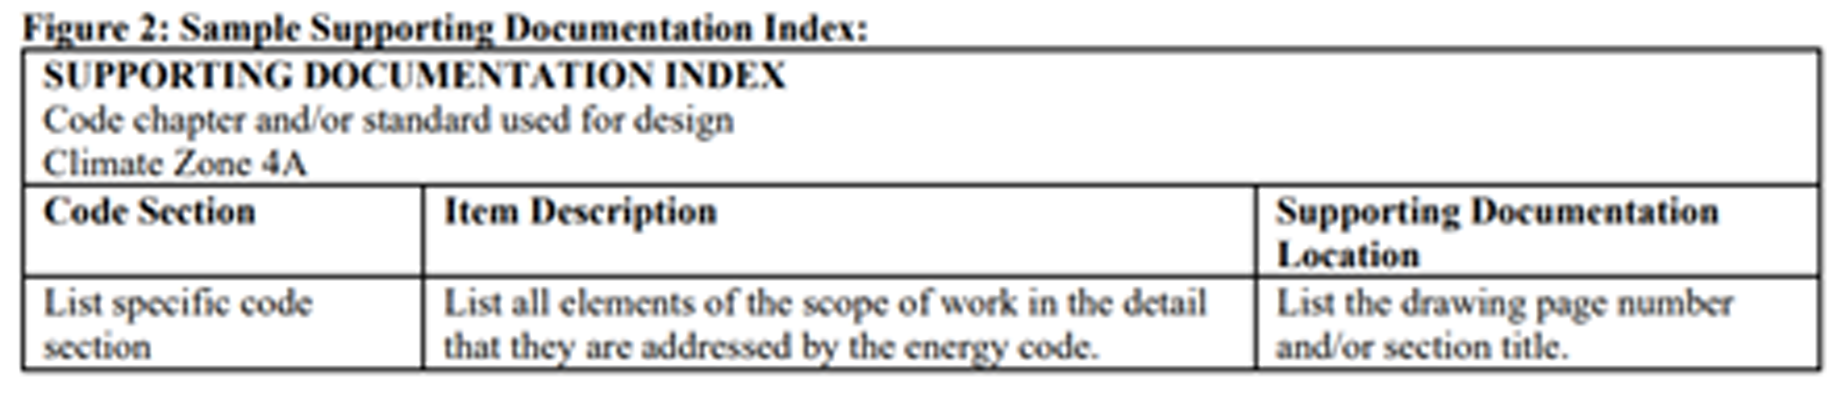 Figure2: Sample Supporting Documentation Index.